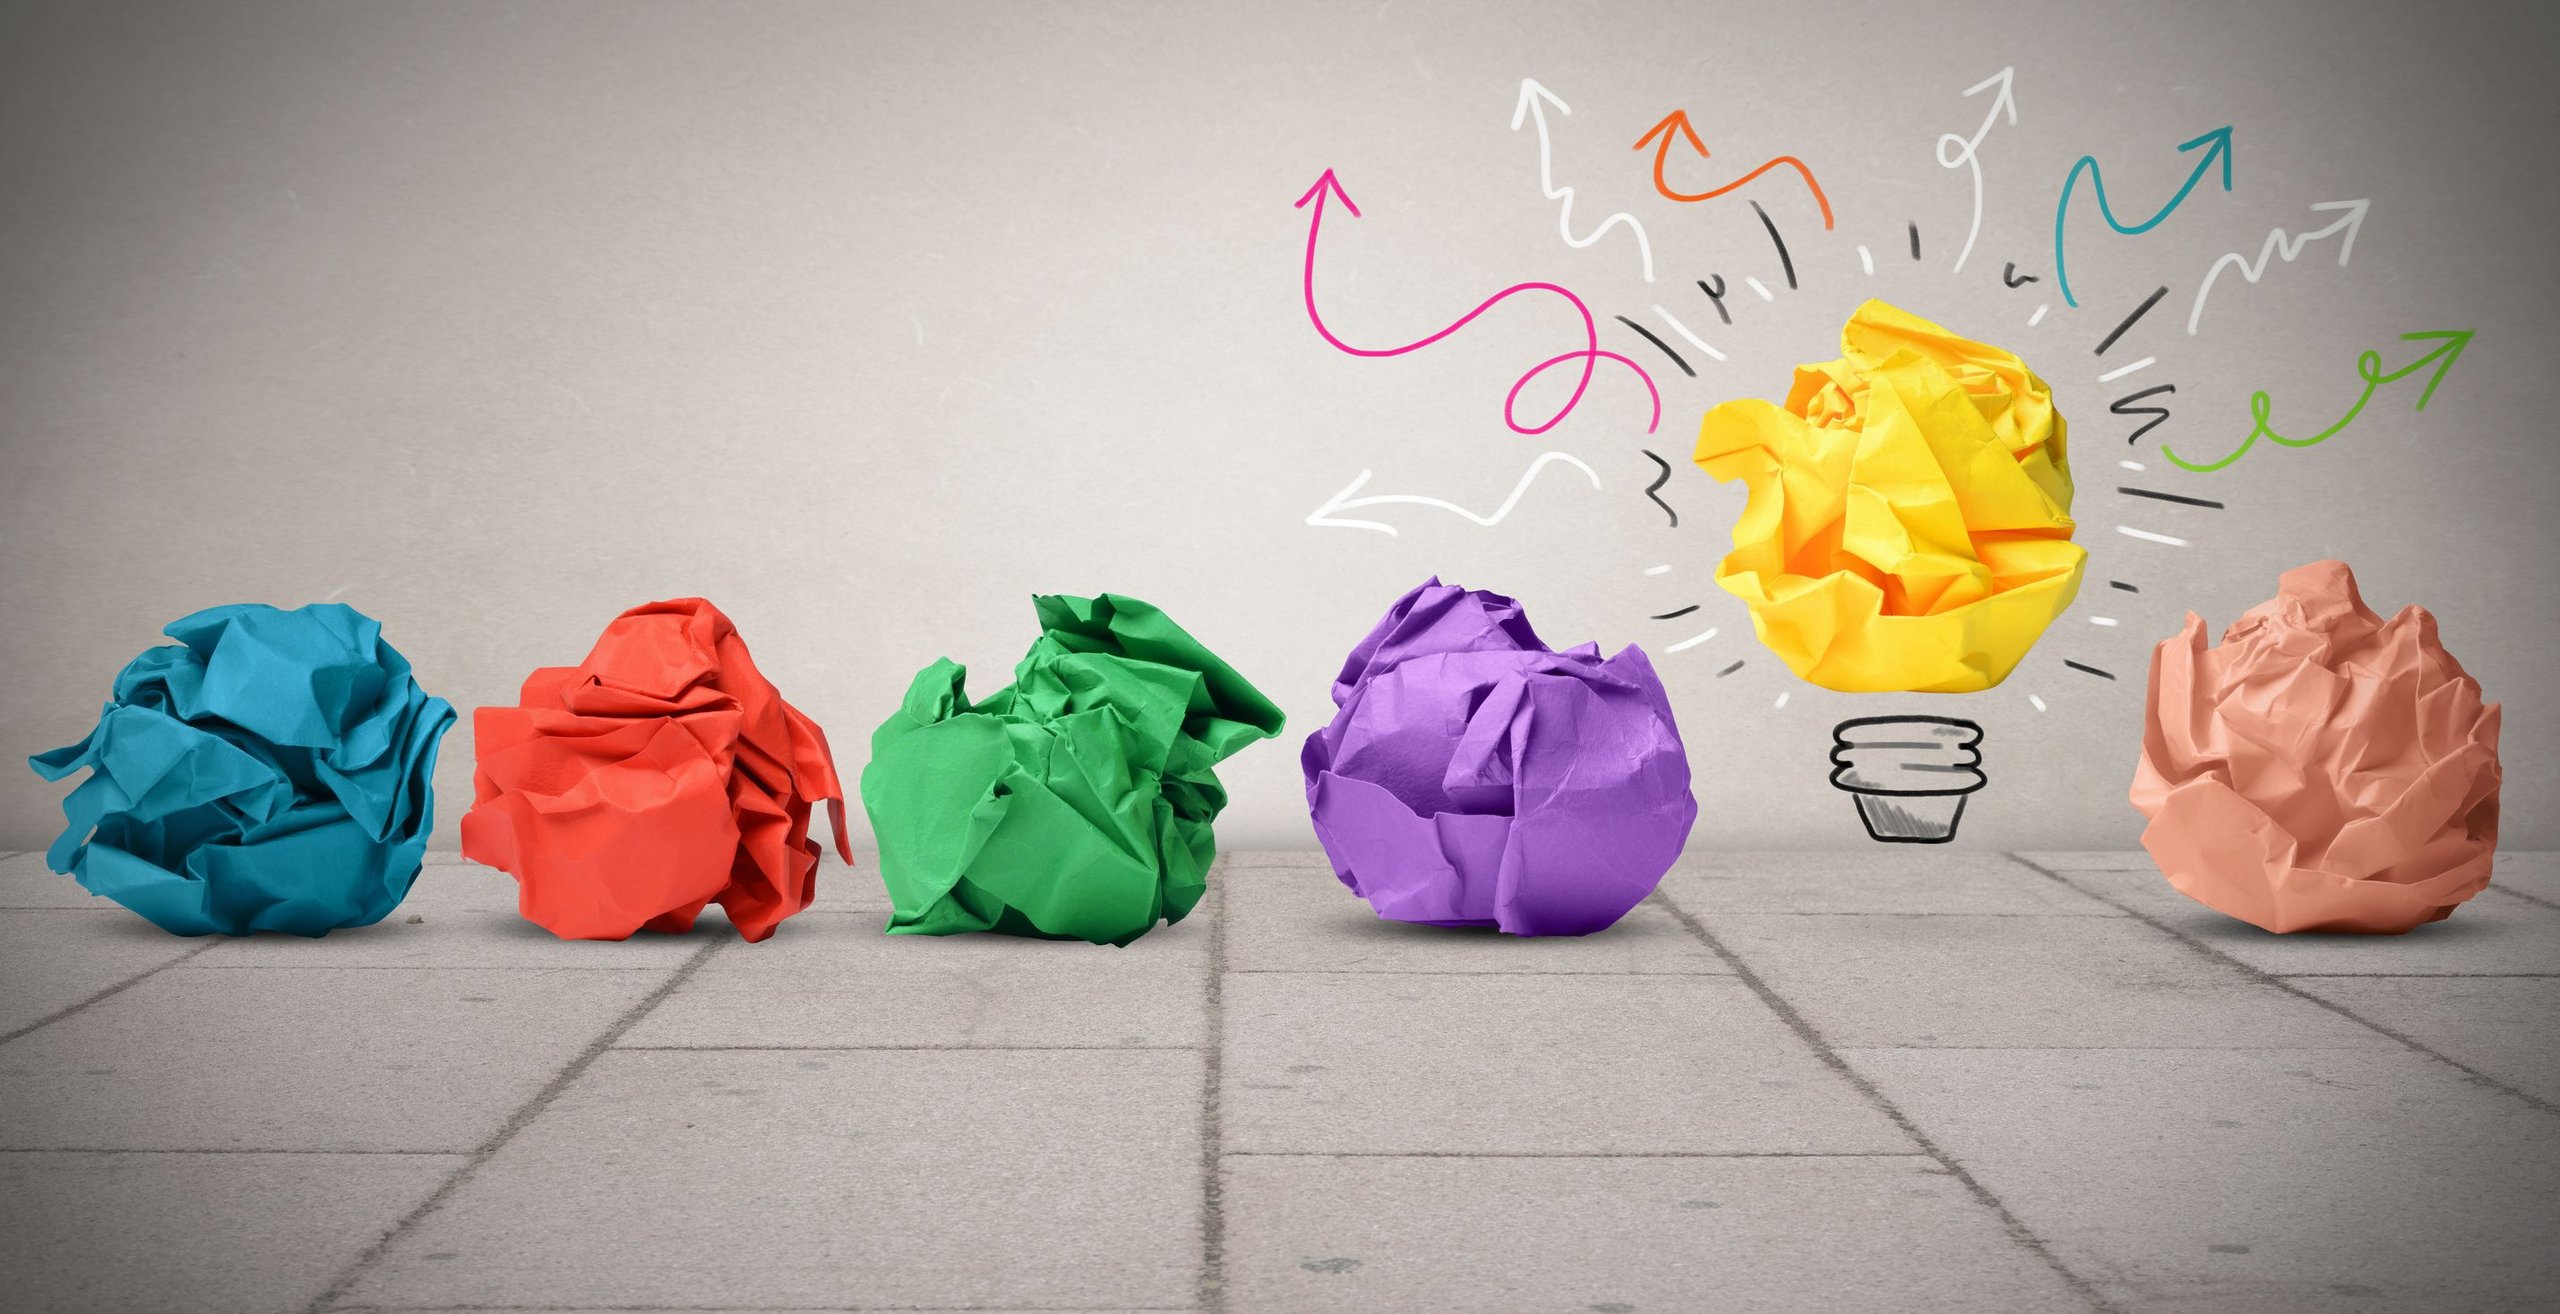 colourful crumpled balls of paper, with one surrounded by arrows to form a lightbulb illustration